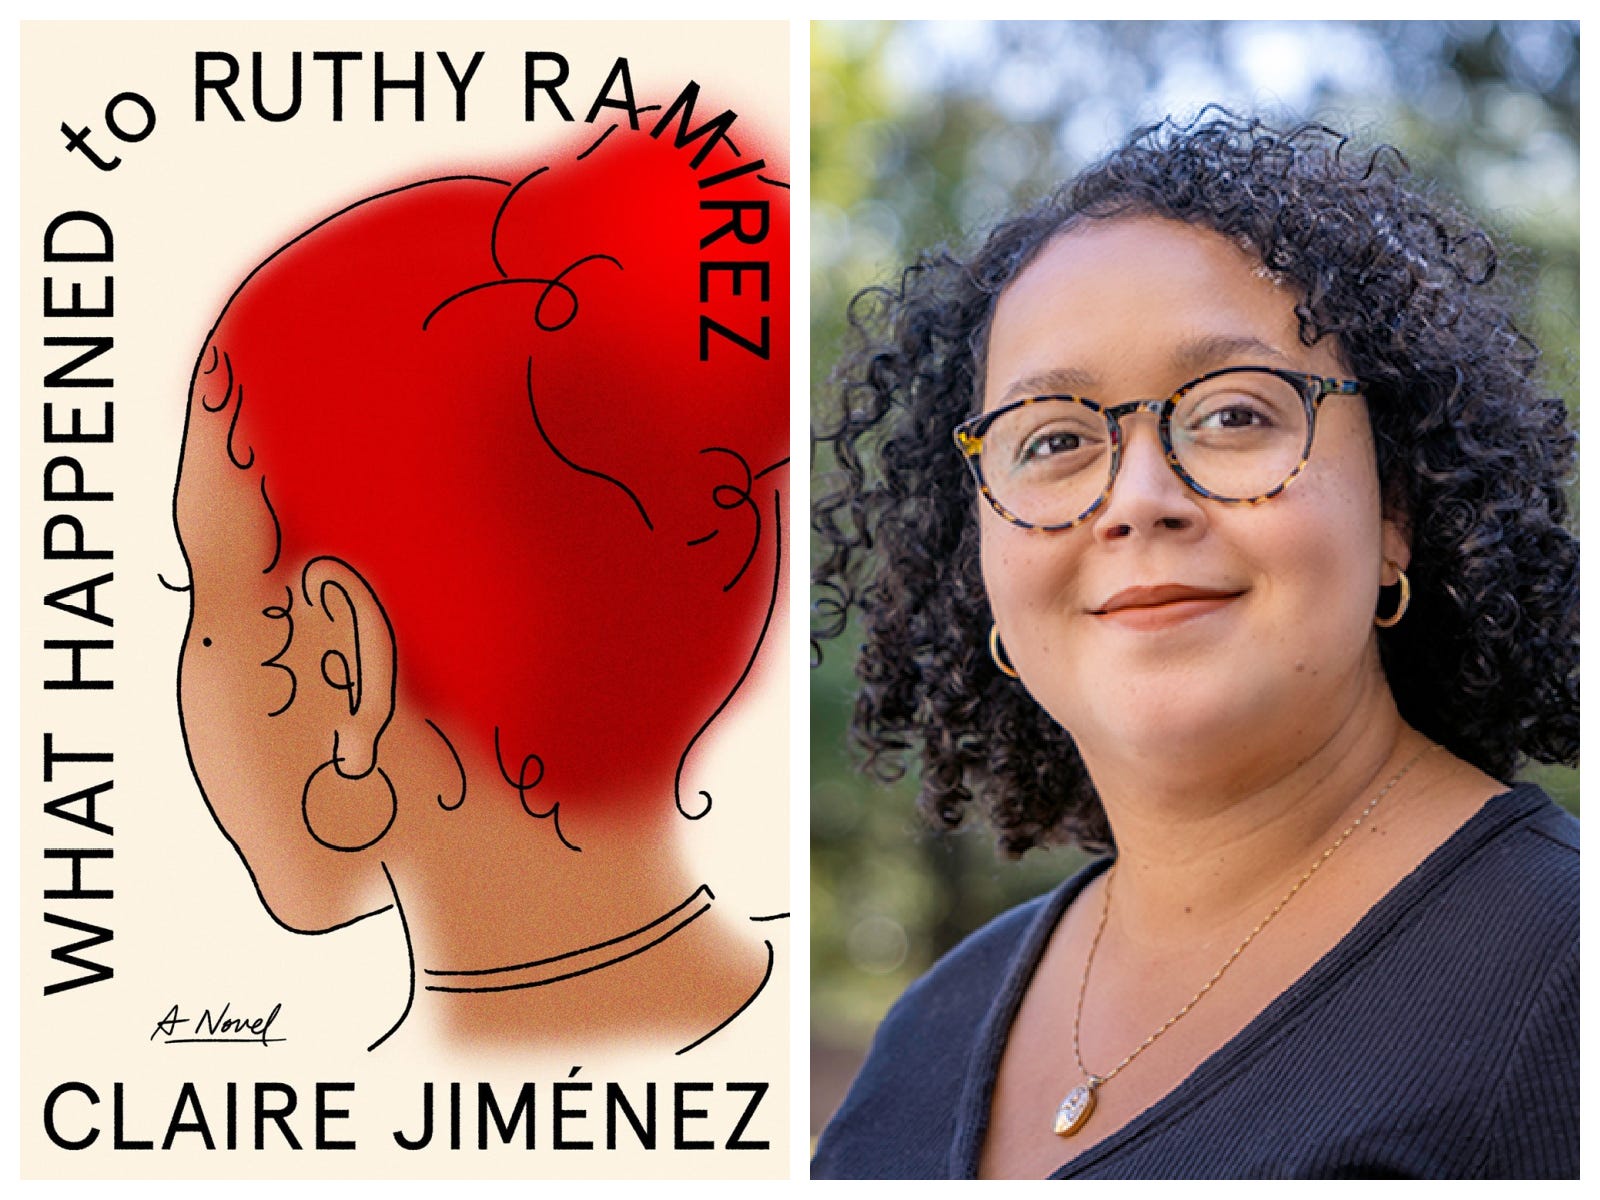 Author Claire Jiménez and the book cover for What Happened to Ruthy Ramirez